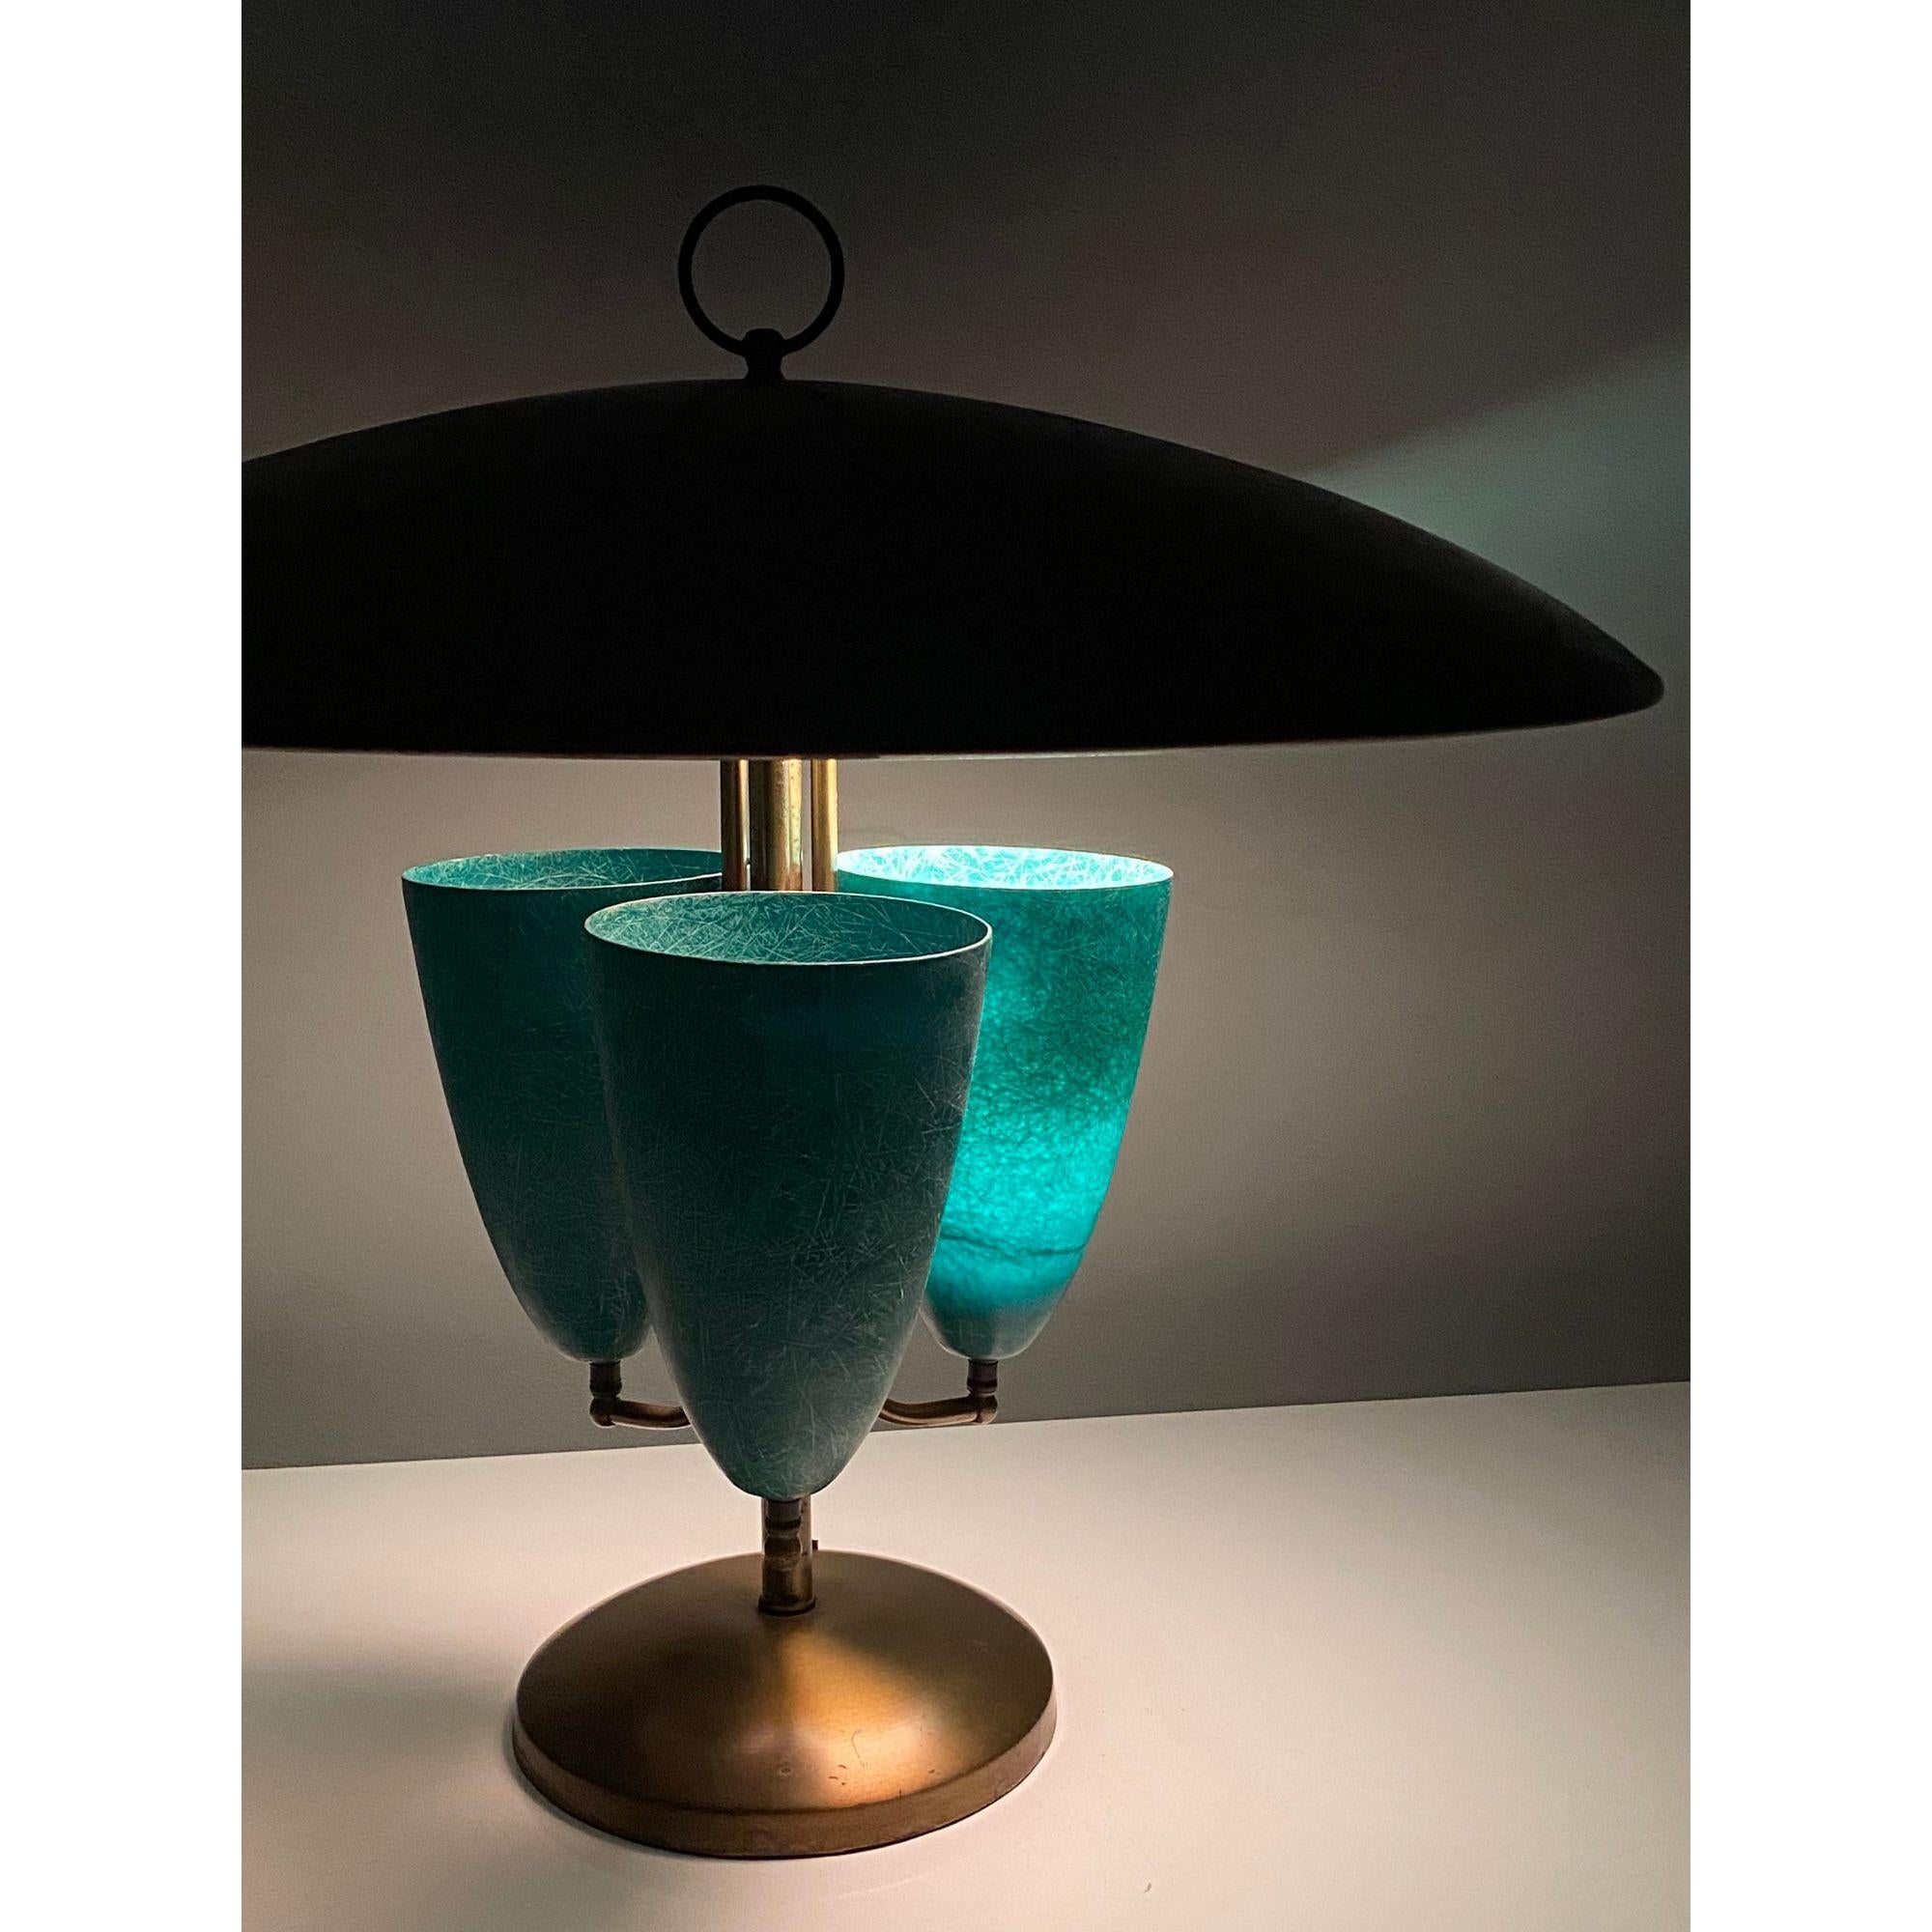 Large Mid Century Modern Canopy Table Lamp in Fiberglass and Brass, circa 1950's For Sale 2